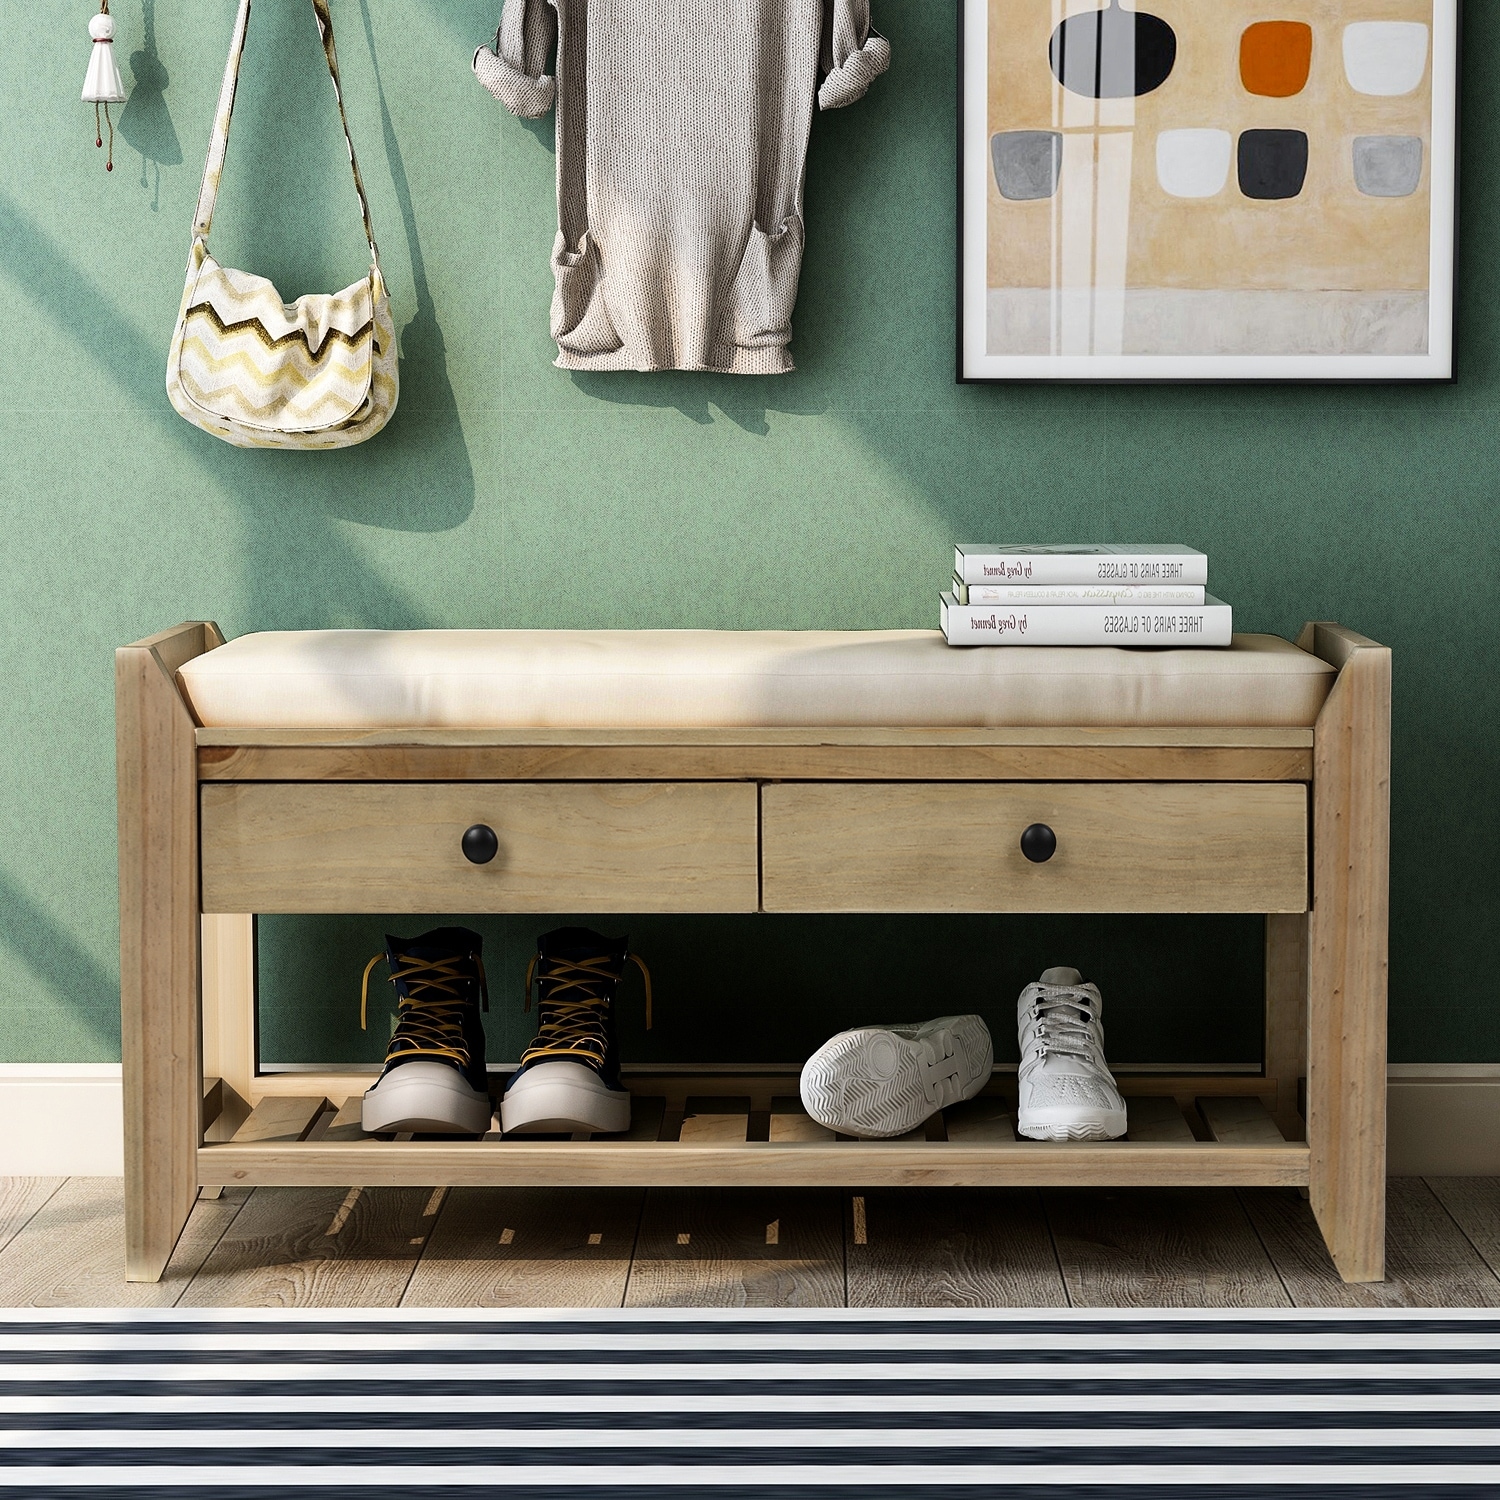 https://ak1.ostkcdn.com/images/products/is/images/direct/b3d430a84510d3b5a7c566f21f71f097d789b5c3/Entryway-Shoe-Bench-Storage-Bench-Hall-Tree-with-Drawer-and-Cushioned.jpg